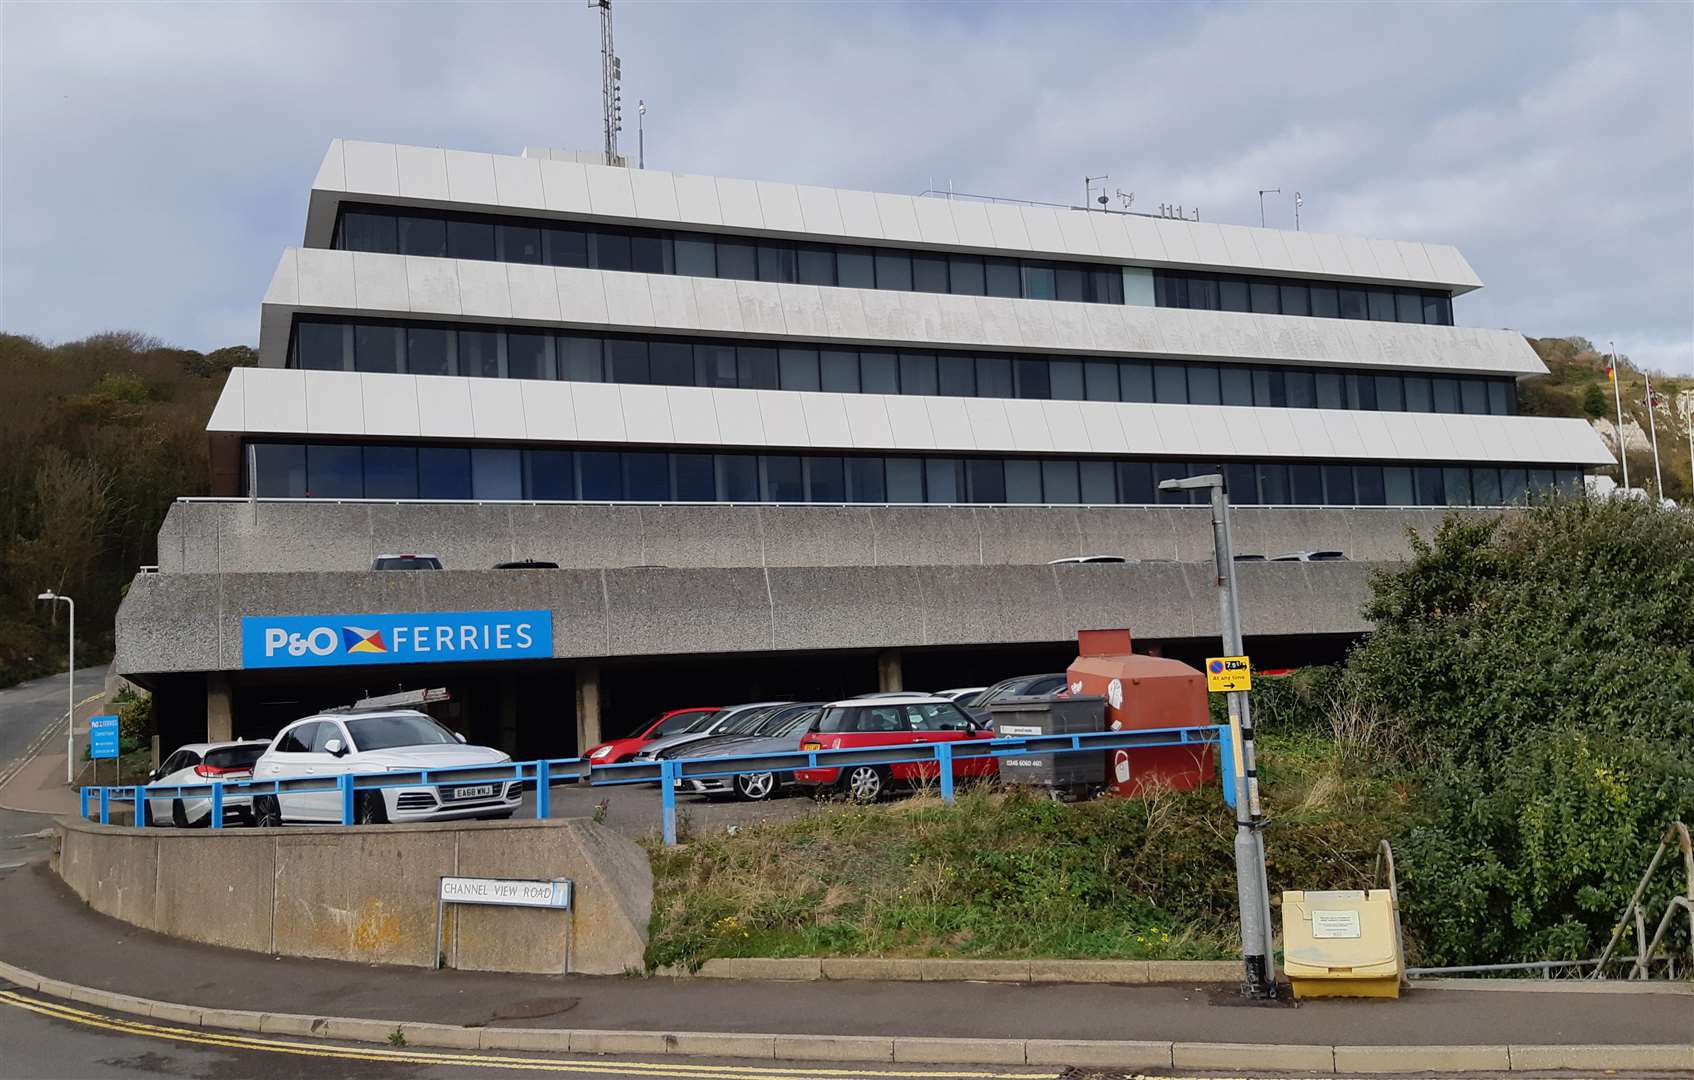 Nerve centre - P&0's UK headquarters at Channel View Road, Dover